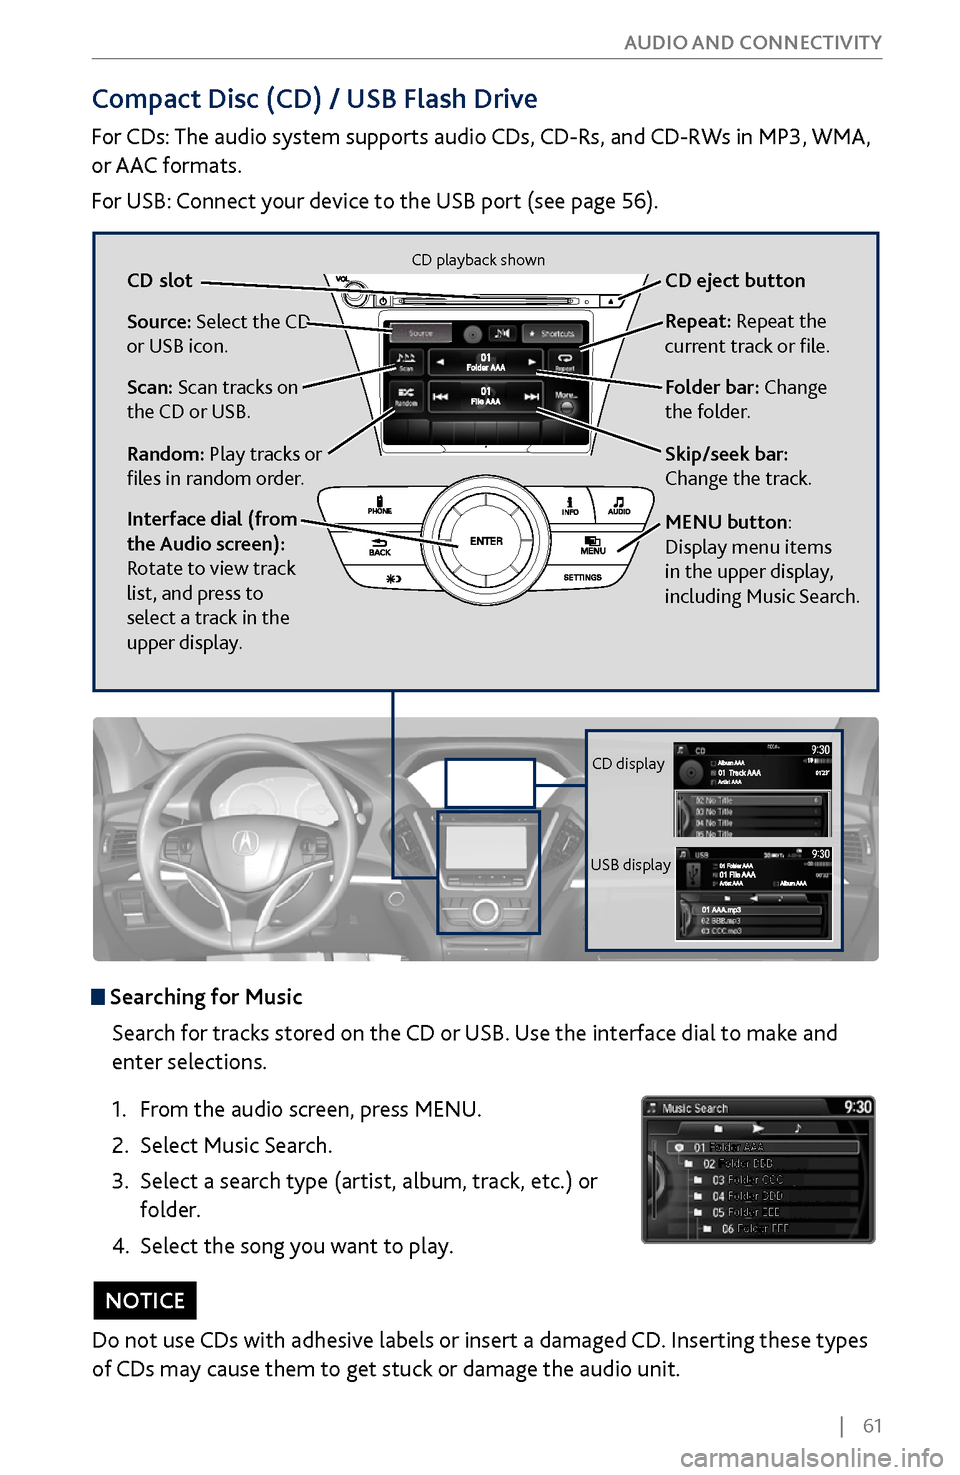 Acura MDX 2017 User Guide |    61
       AUDIO AND CONNECTIVITY
Compact Disc (CD) / USB Flash Drive
For CDs: The audio system supports audio CDs, CD-Rs, and CD-RWs in MP3, WMA, 
or AAC formats.
For USB: Connect your device to 